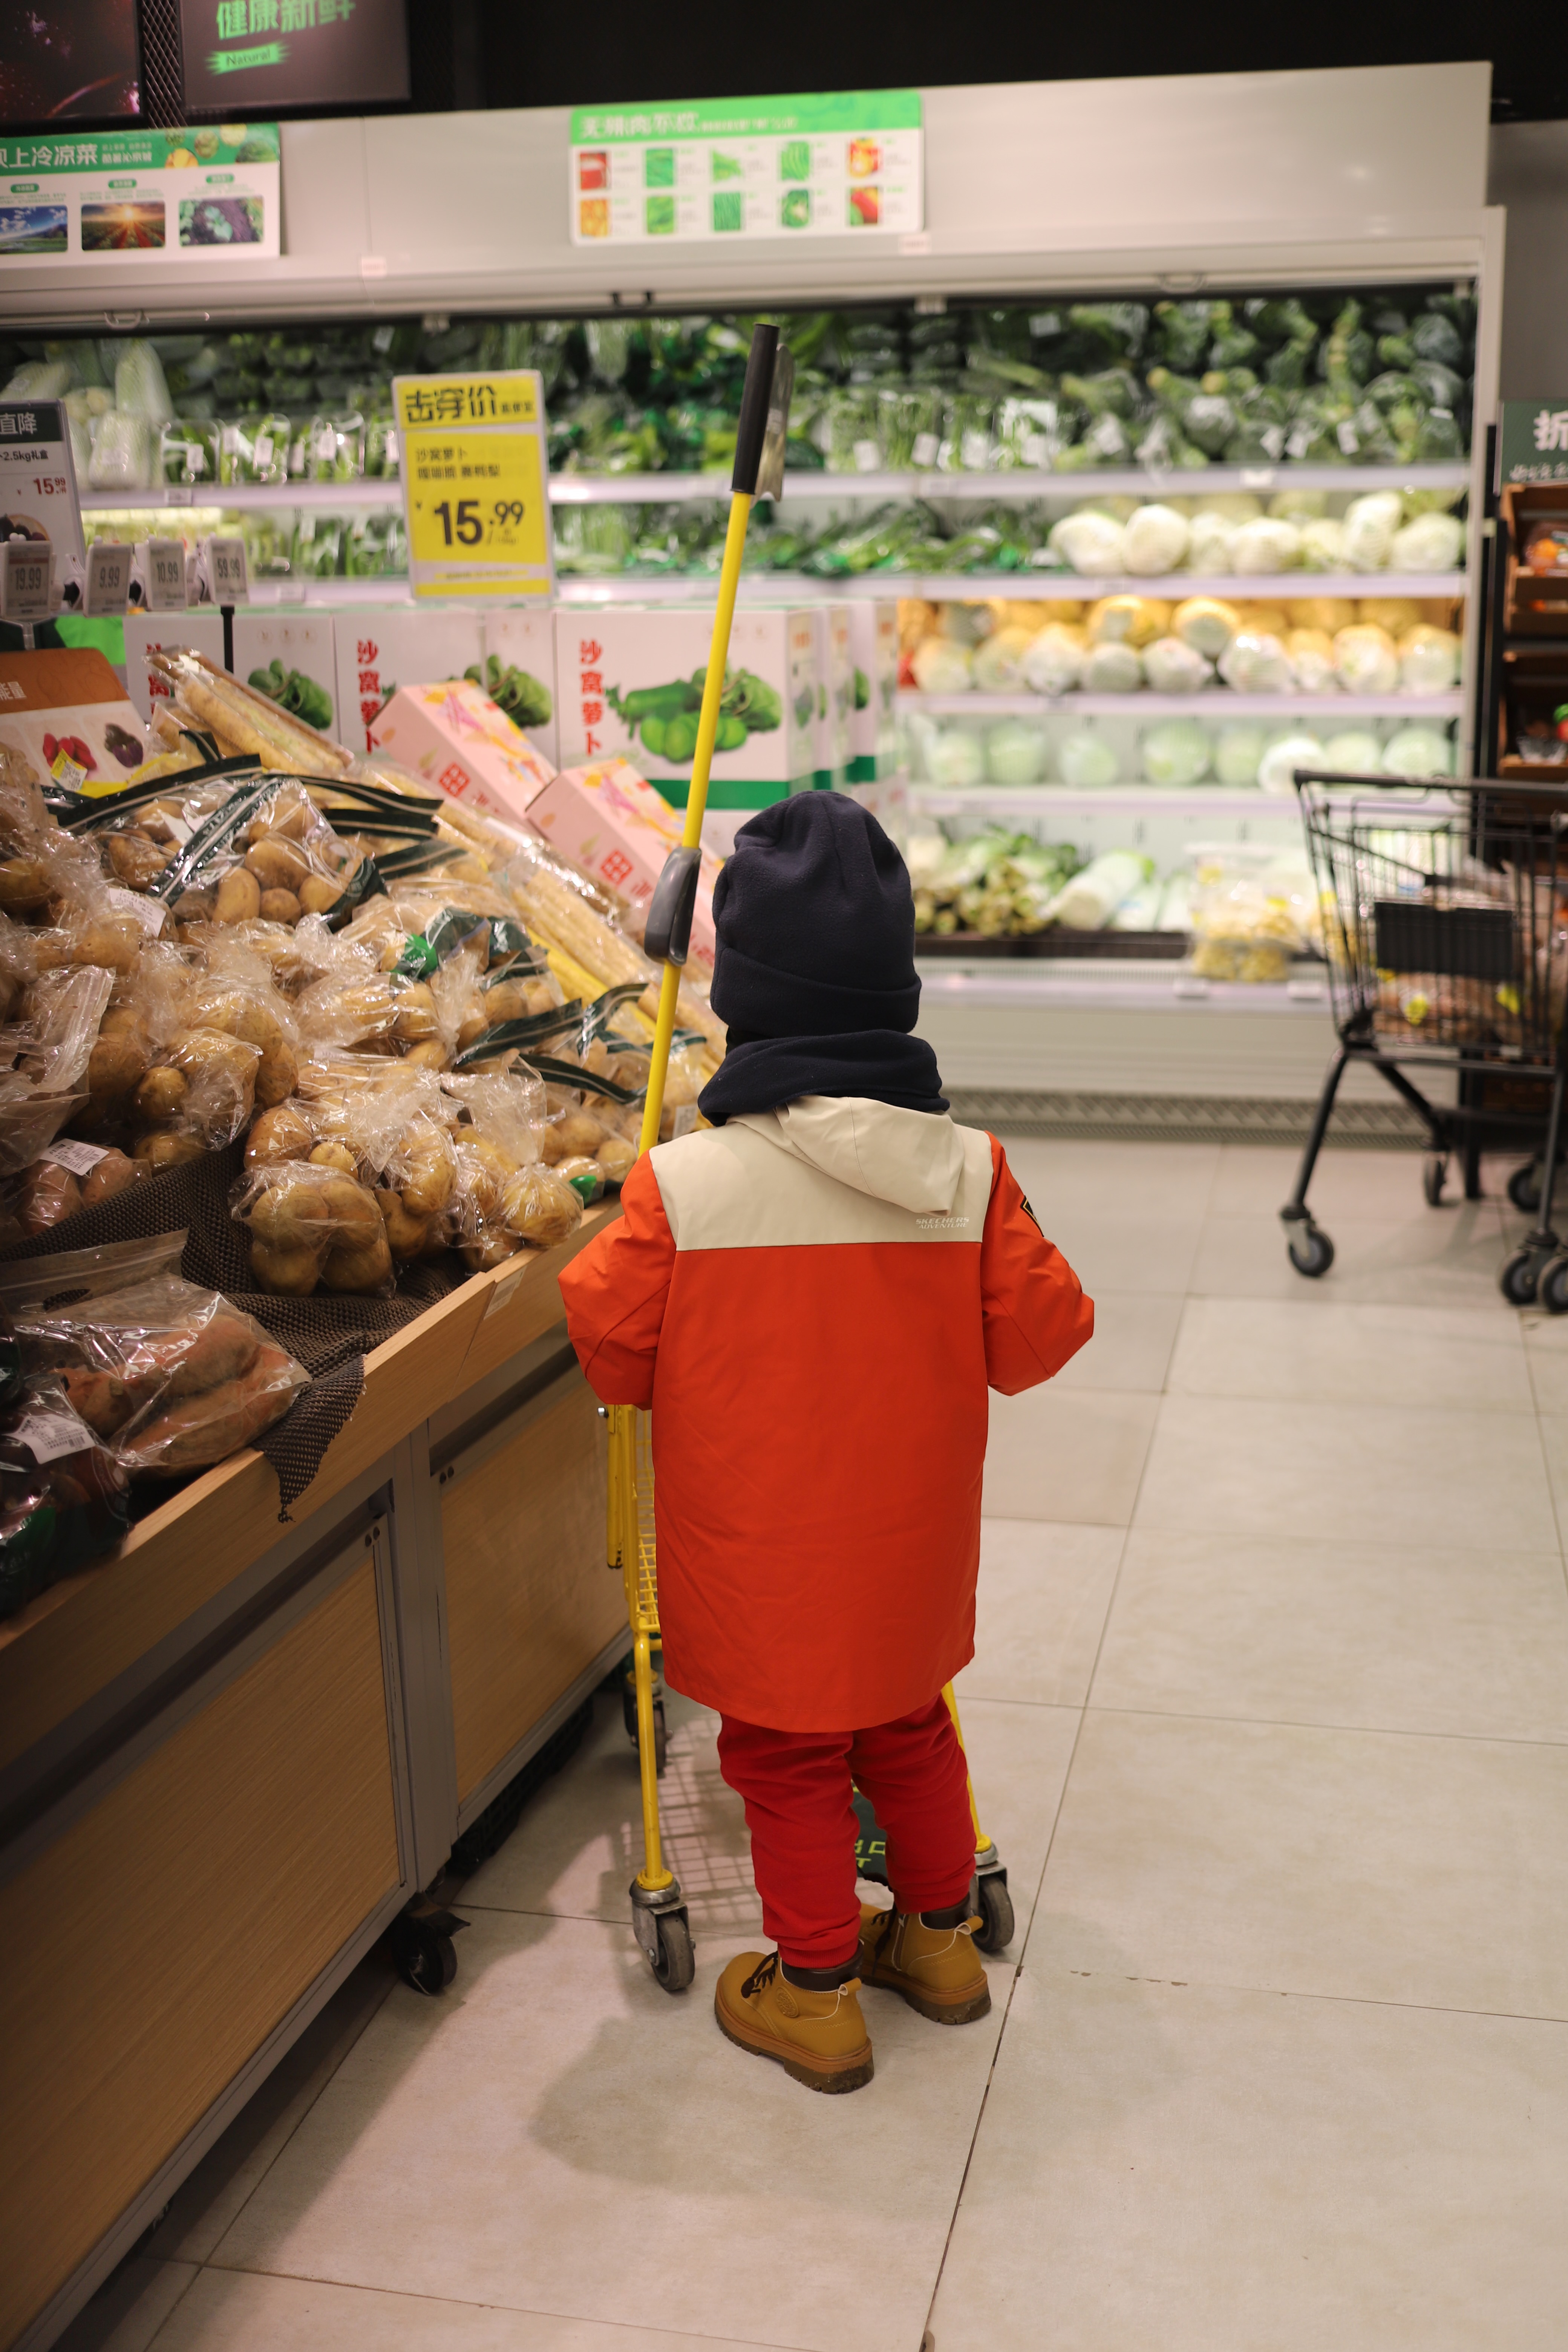 My son pushing a child sized supermarket trolley around the fresh food section of the local supermarket.